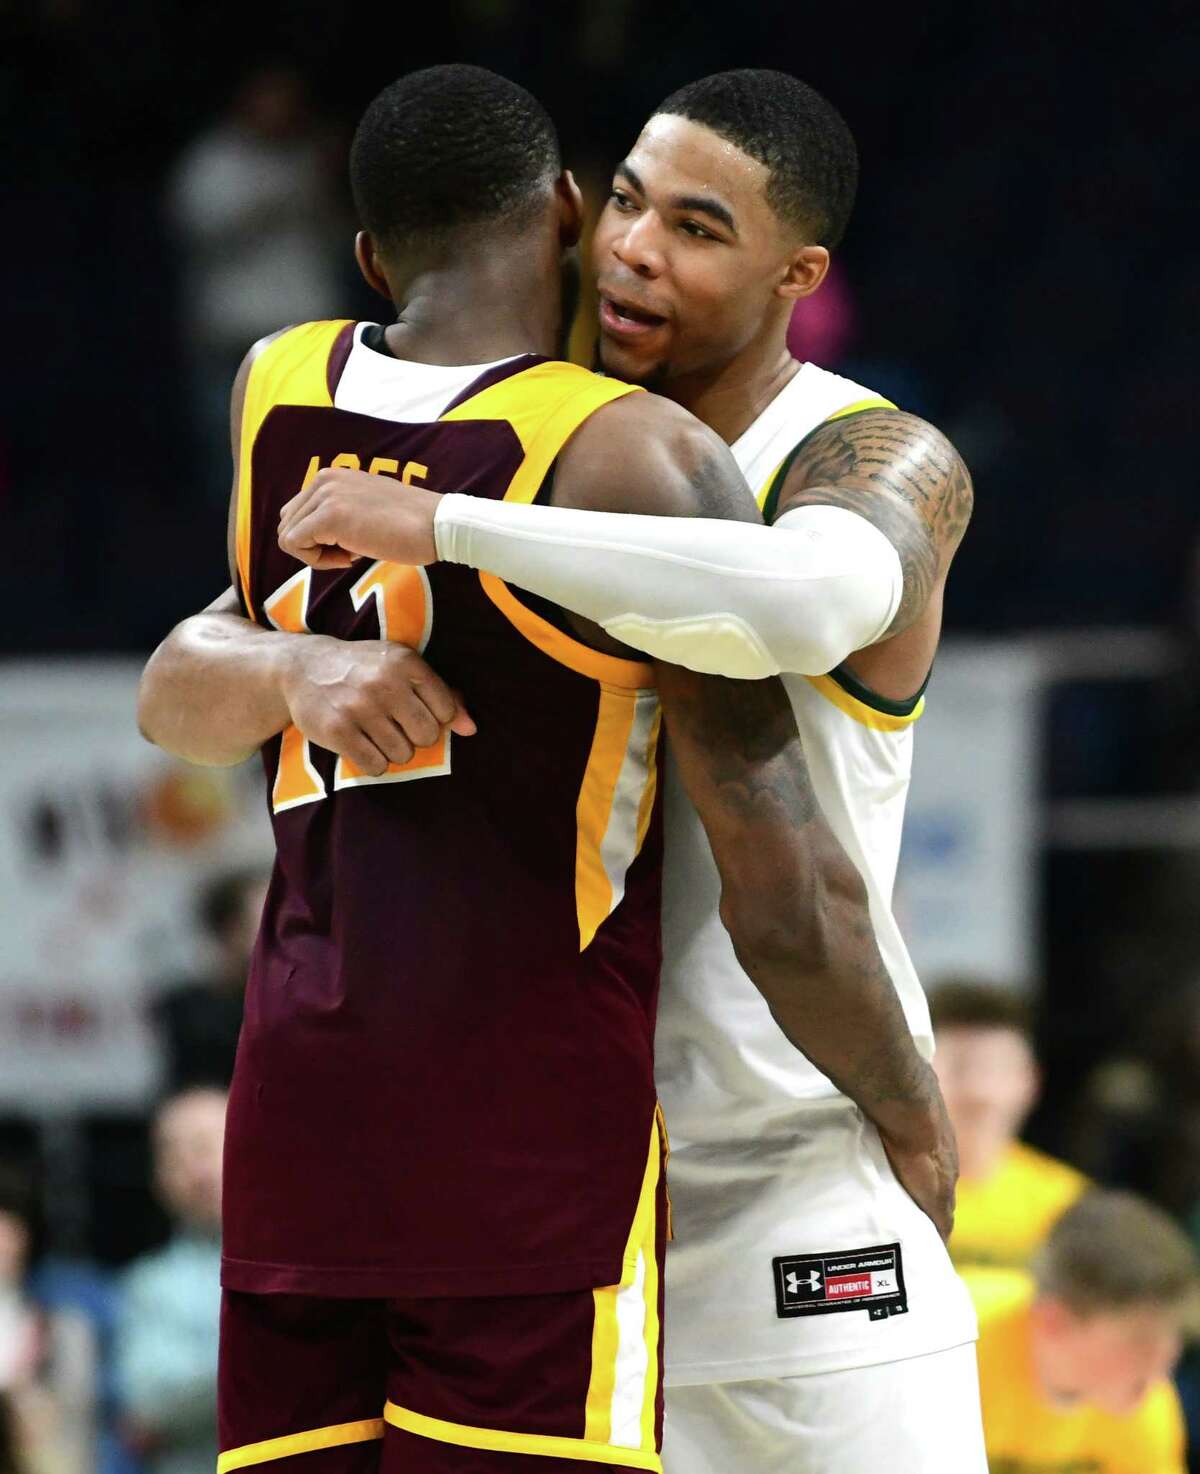 Siena's Elijah Burns, right, hugs Iona's Tajuan Agee after Siena's win at the Times Union Center on Wednesday, Feb. 19, 2020 in Albany, N.Y. (Lori Van Buren/Times Union)